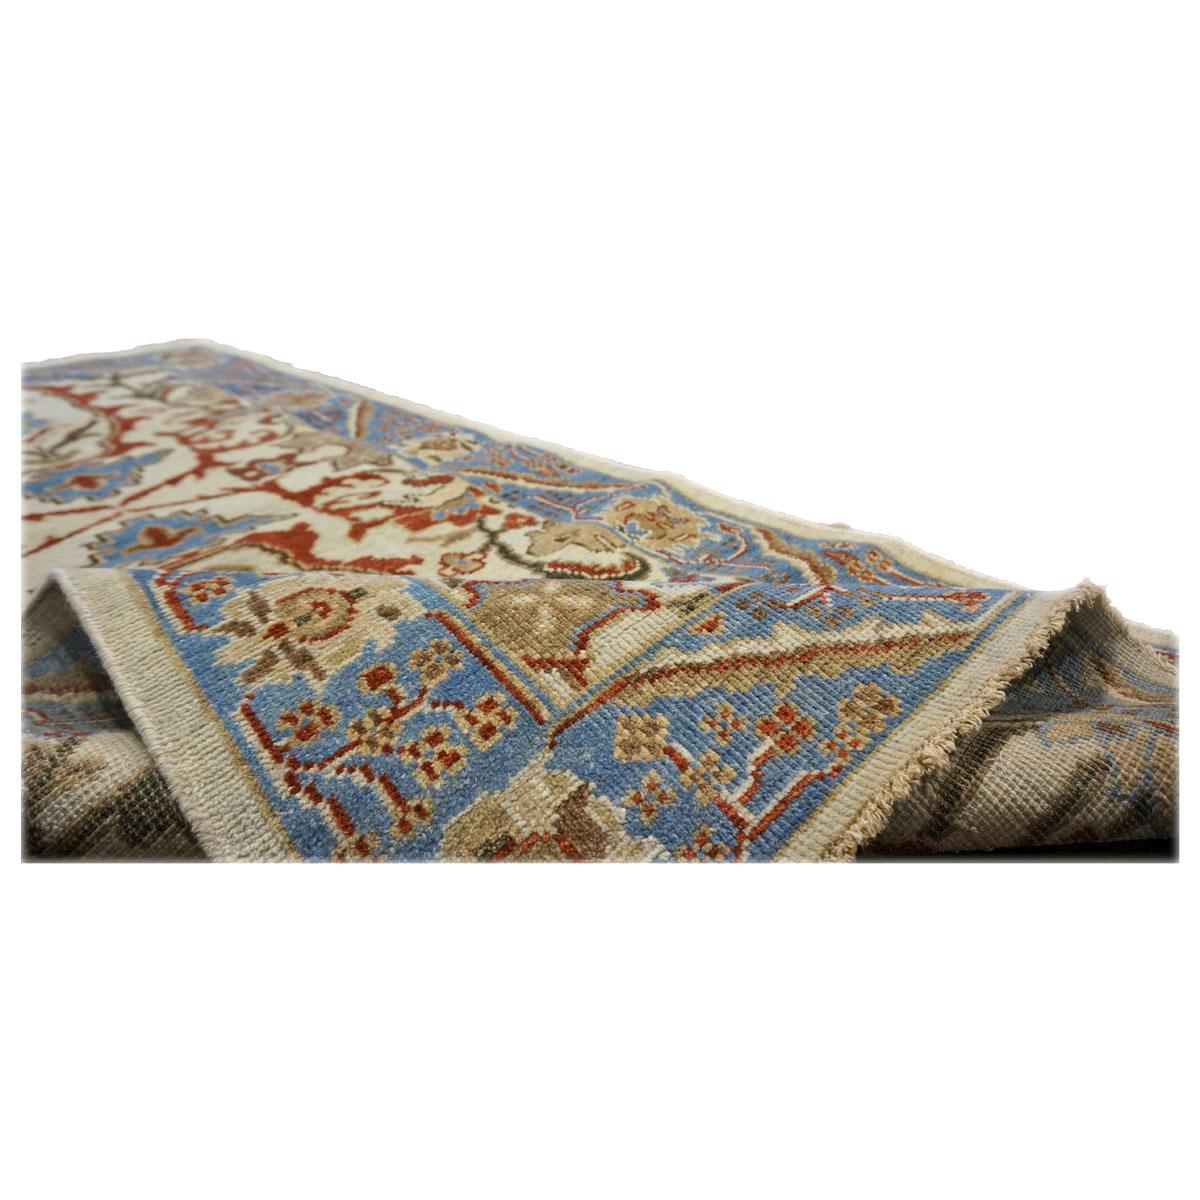 21st Century Sultanabad Master 3x6 Blue, Ivory, & Red Hallway Runner Rug In Excellent Condition For Sale In Houston, TX